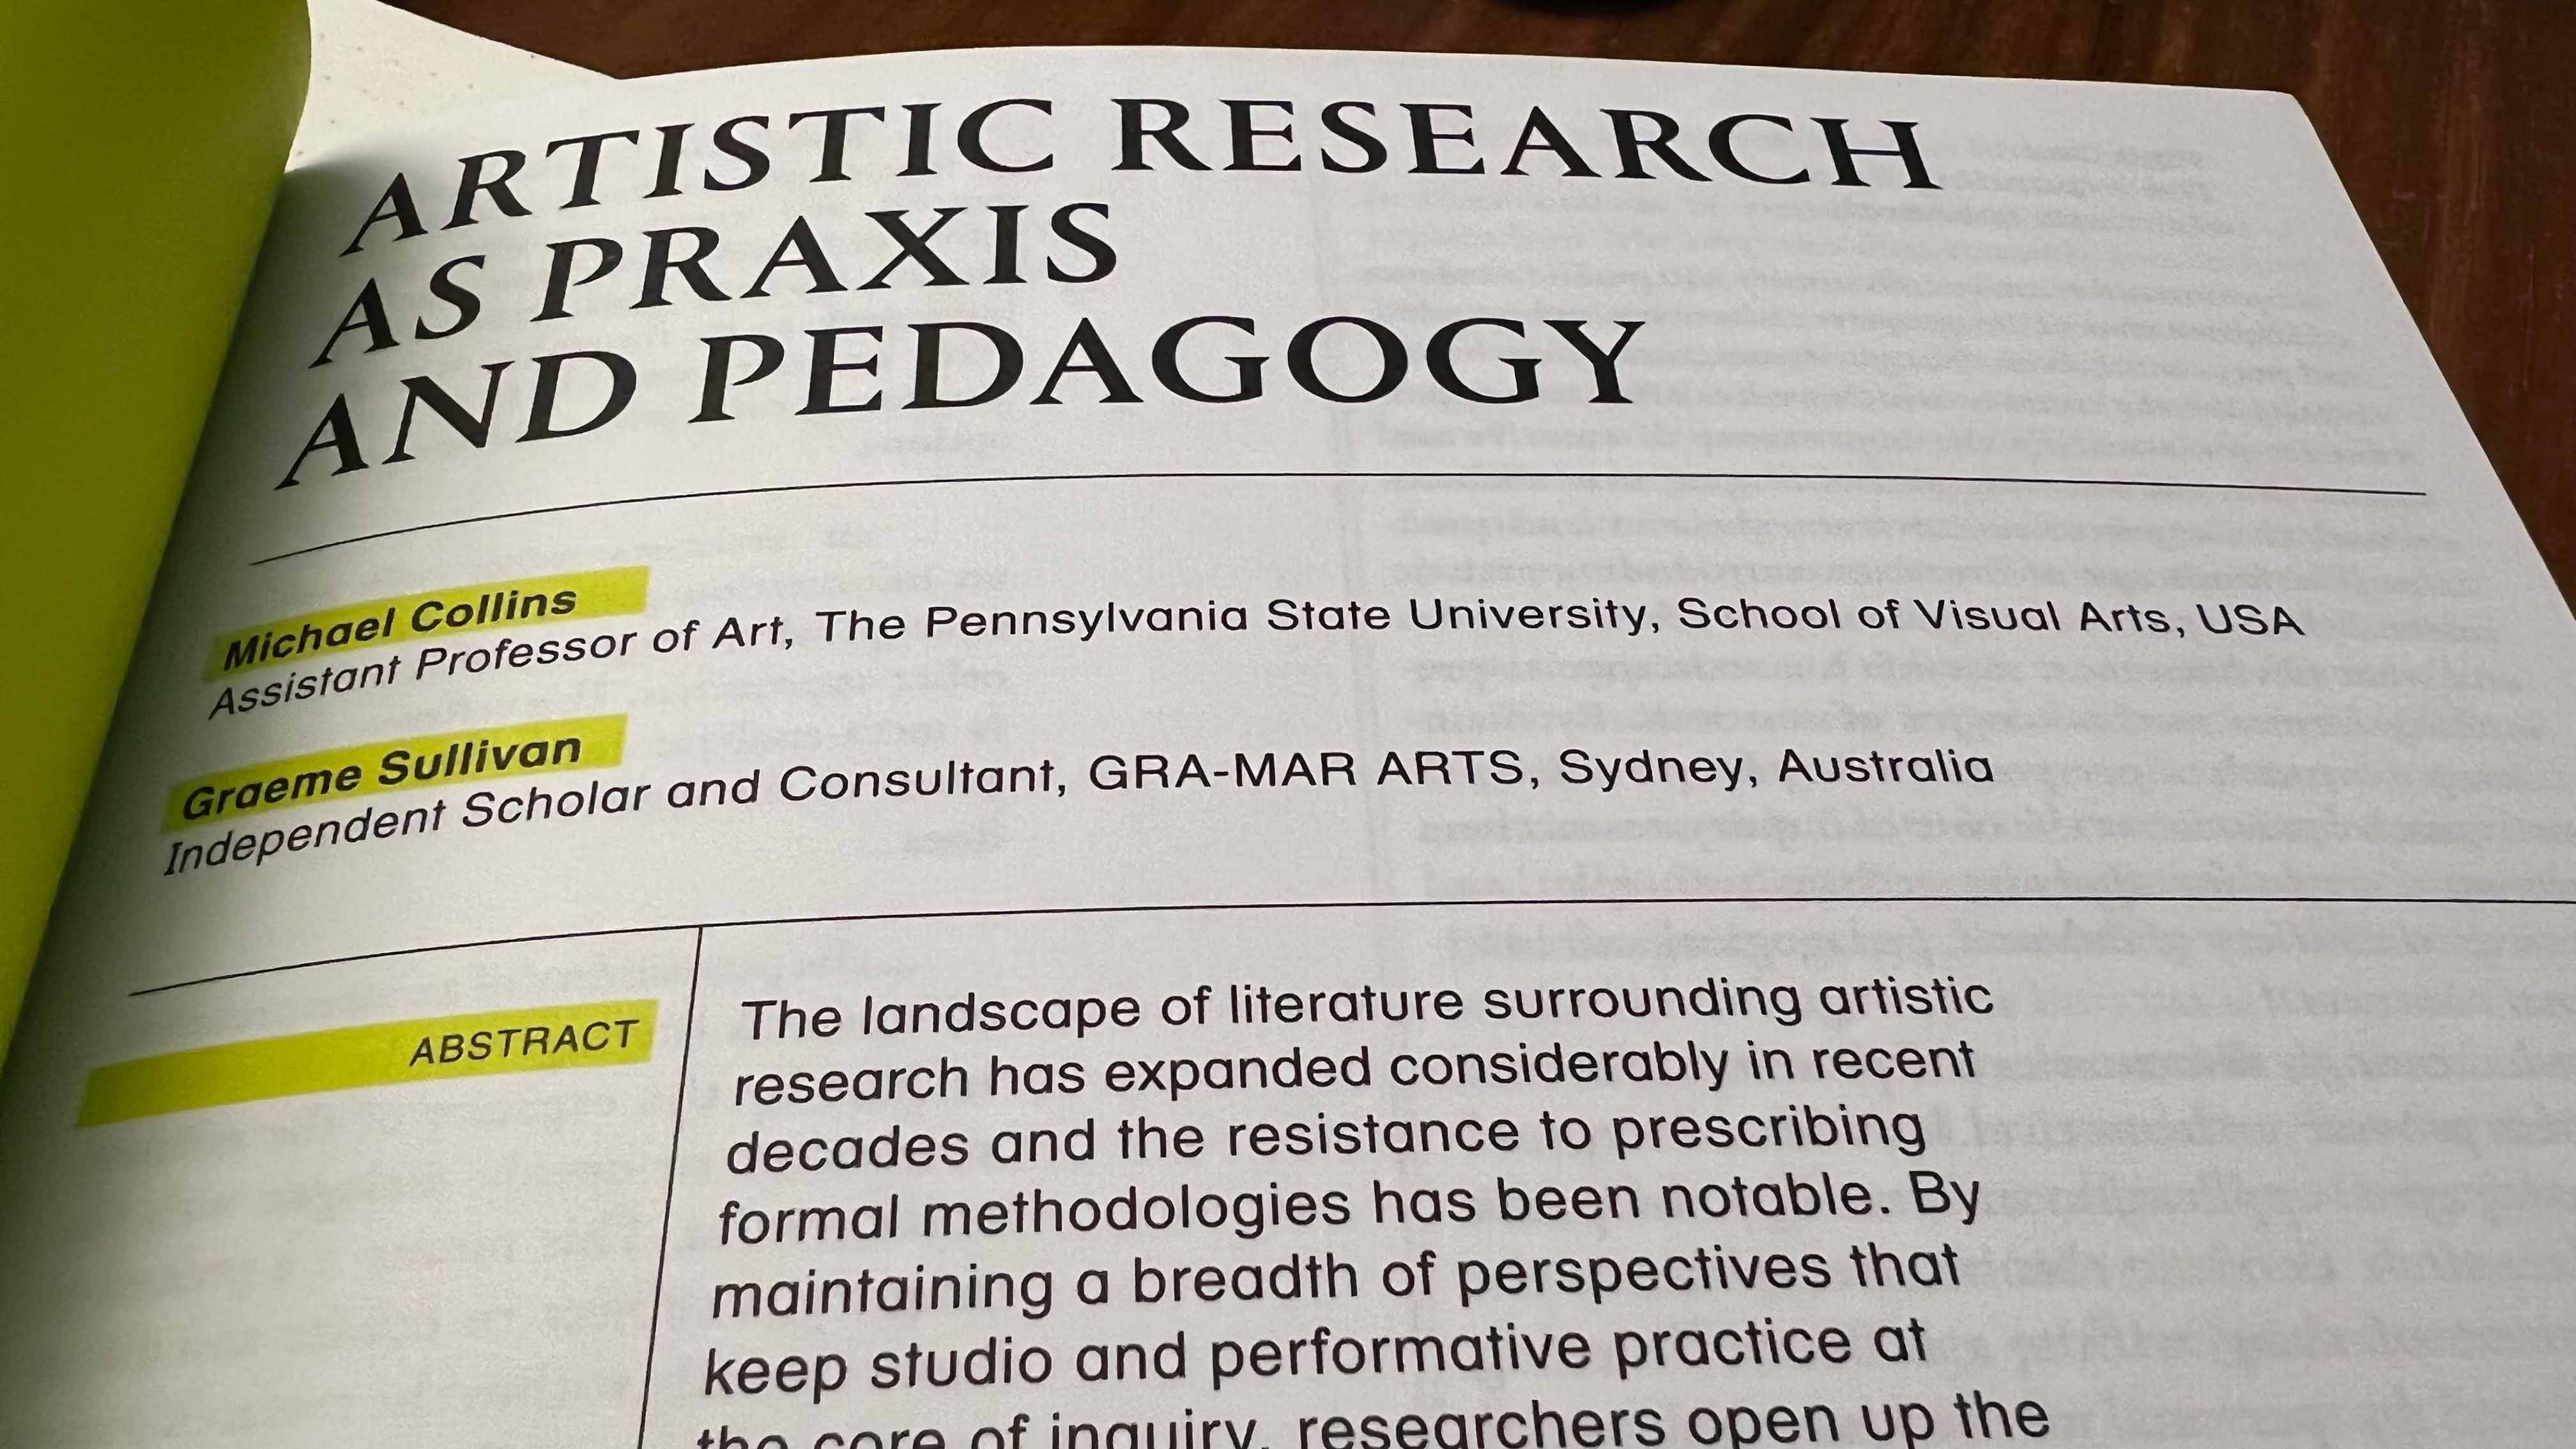 Artistic Research as Praxis and Pedagogy